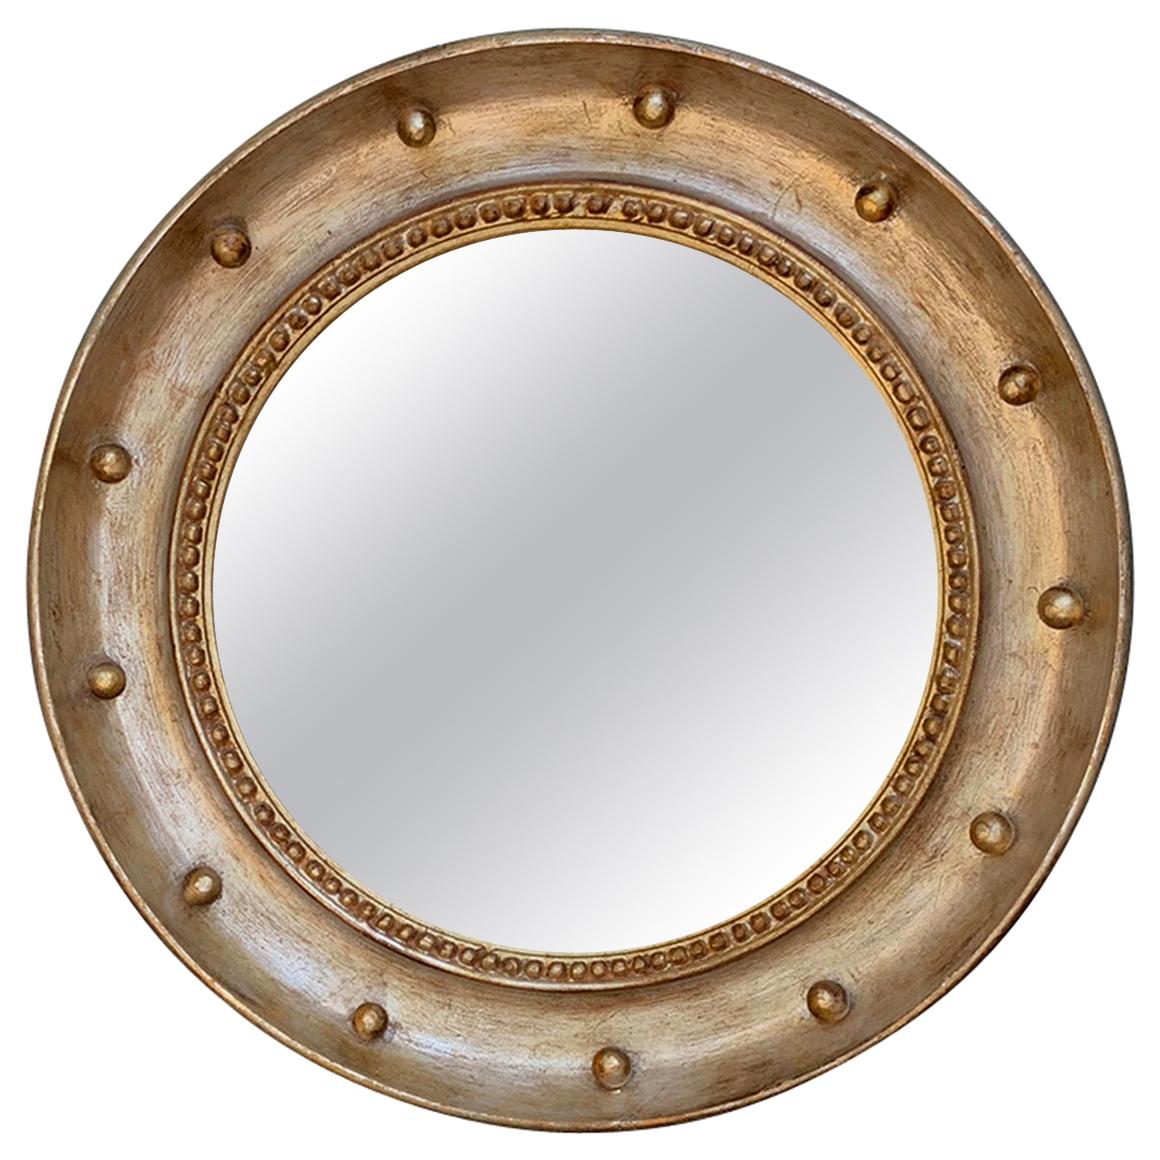 20th Century Regency Style Round Mirror with Silver/Gold Gilt Finish